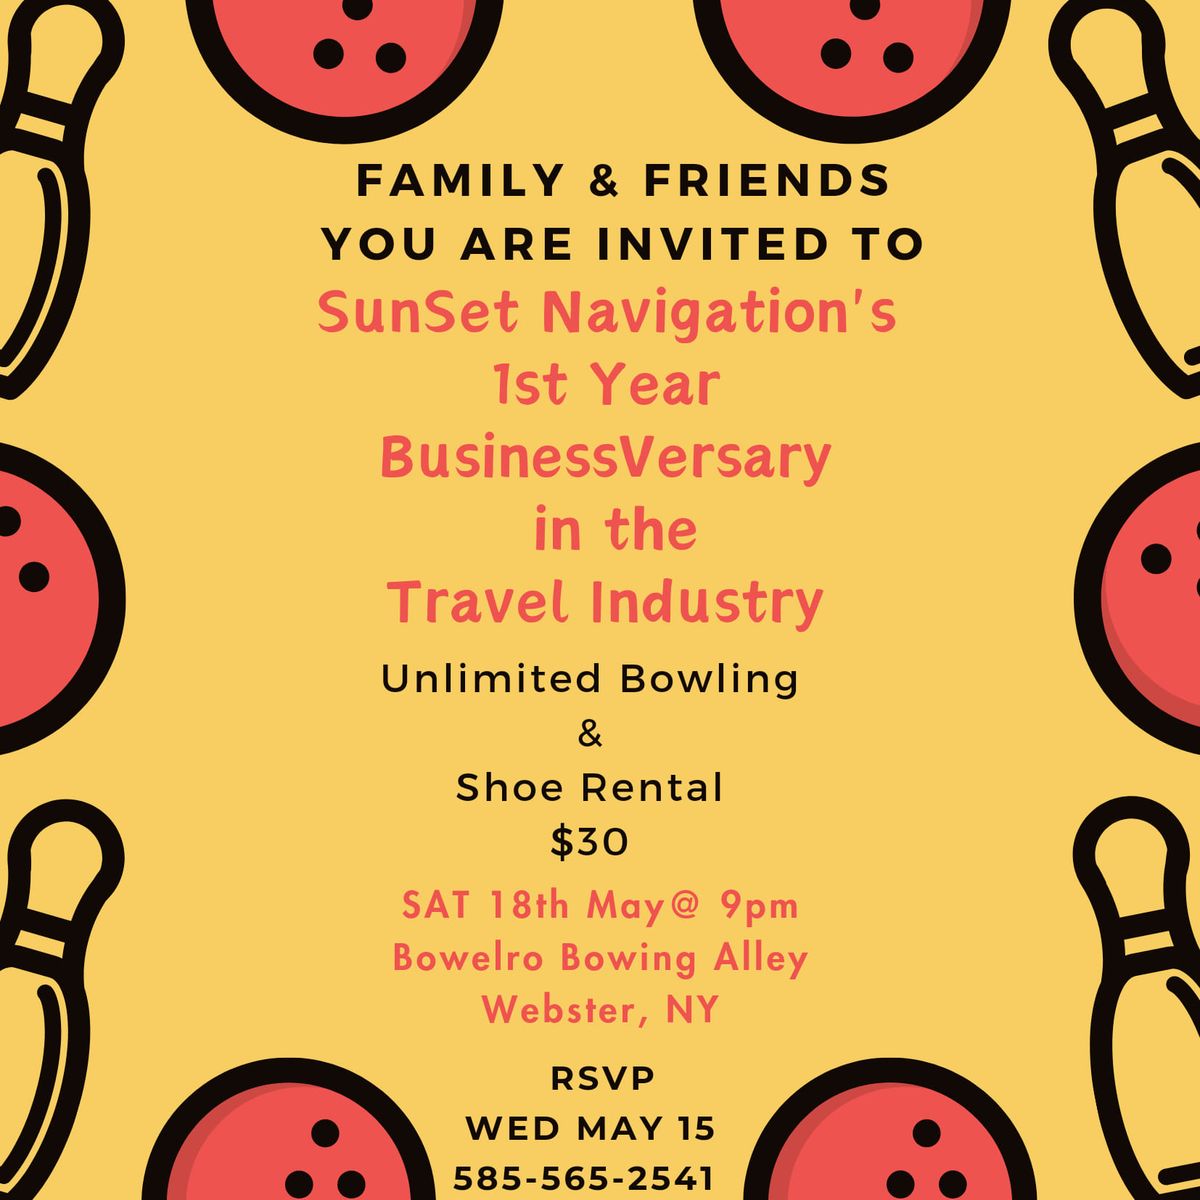 1st year BusinessVersary within the Travel Industry 